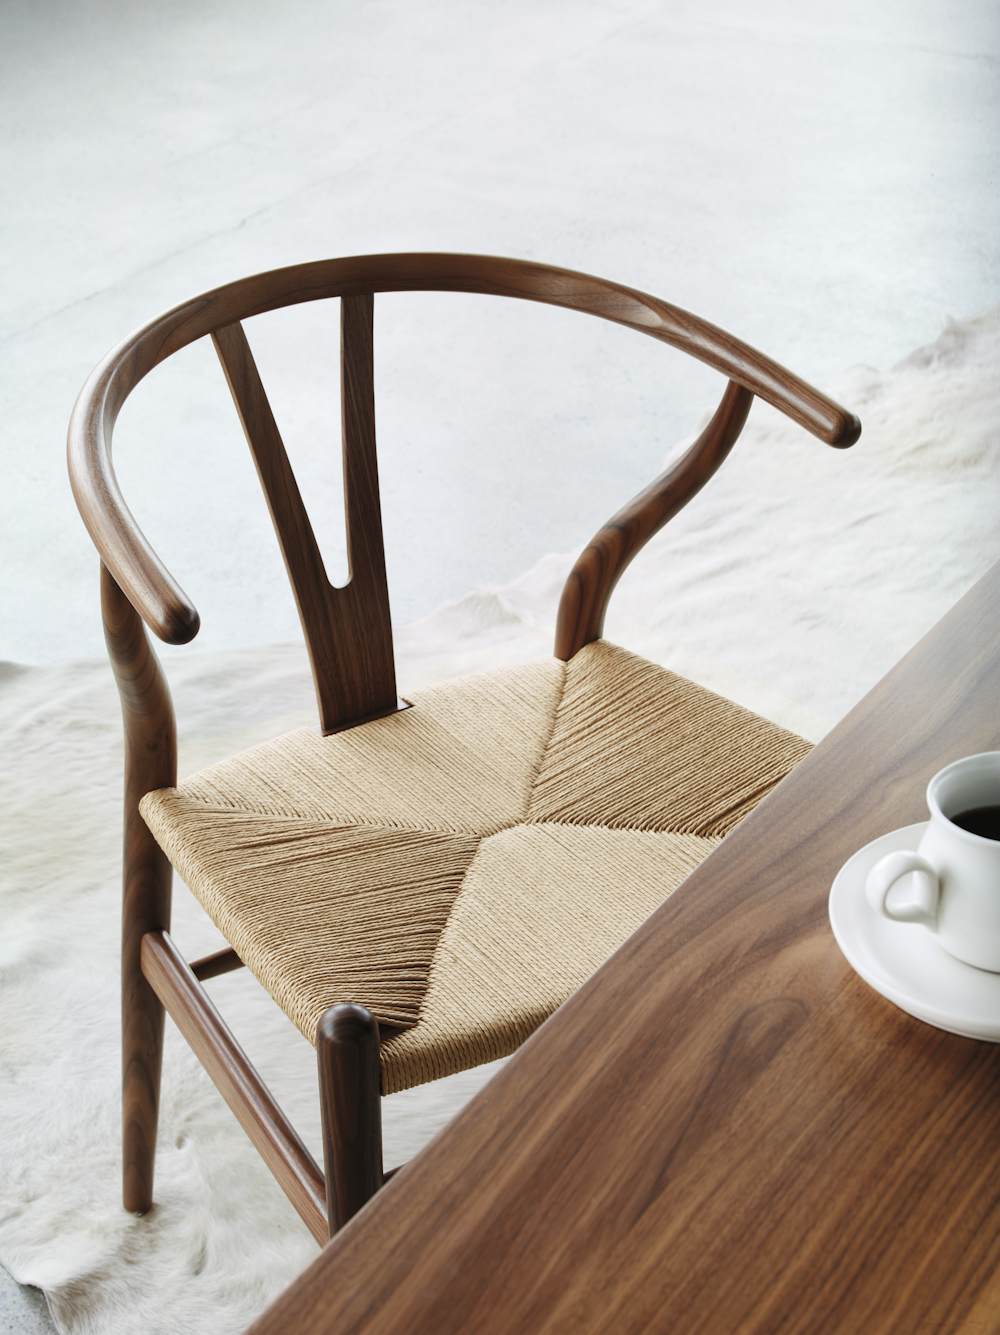 Wishbone Chair at a dining table